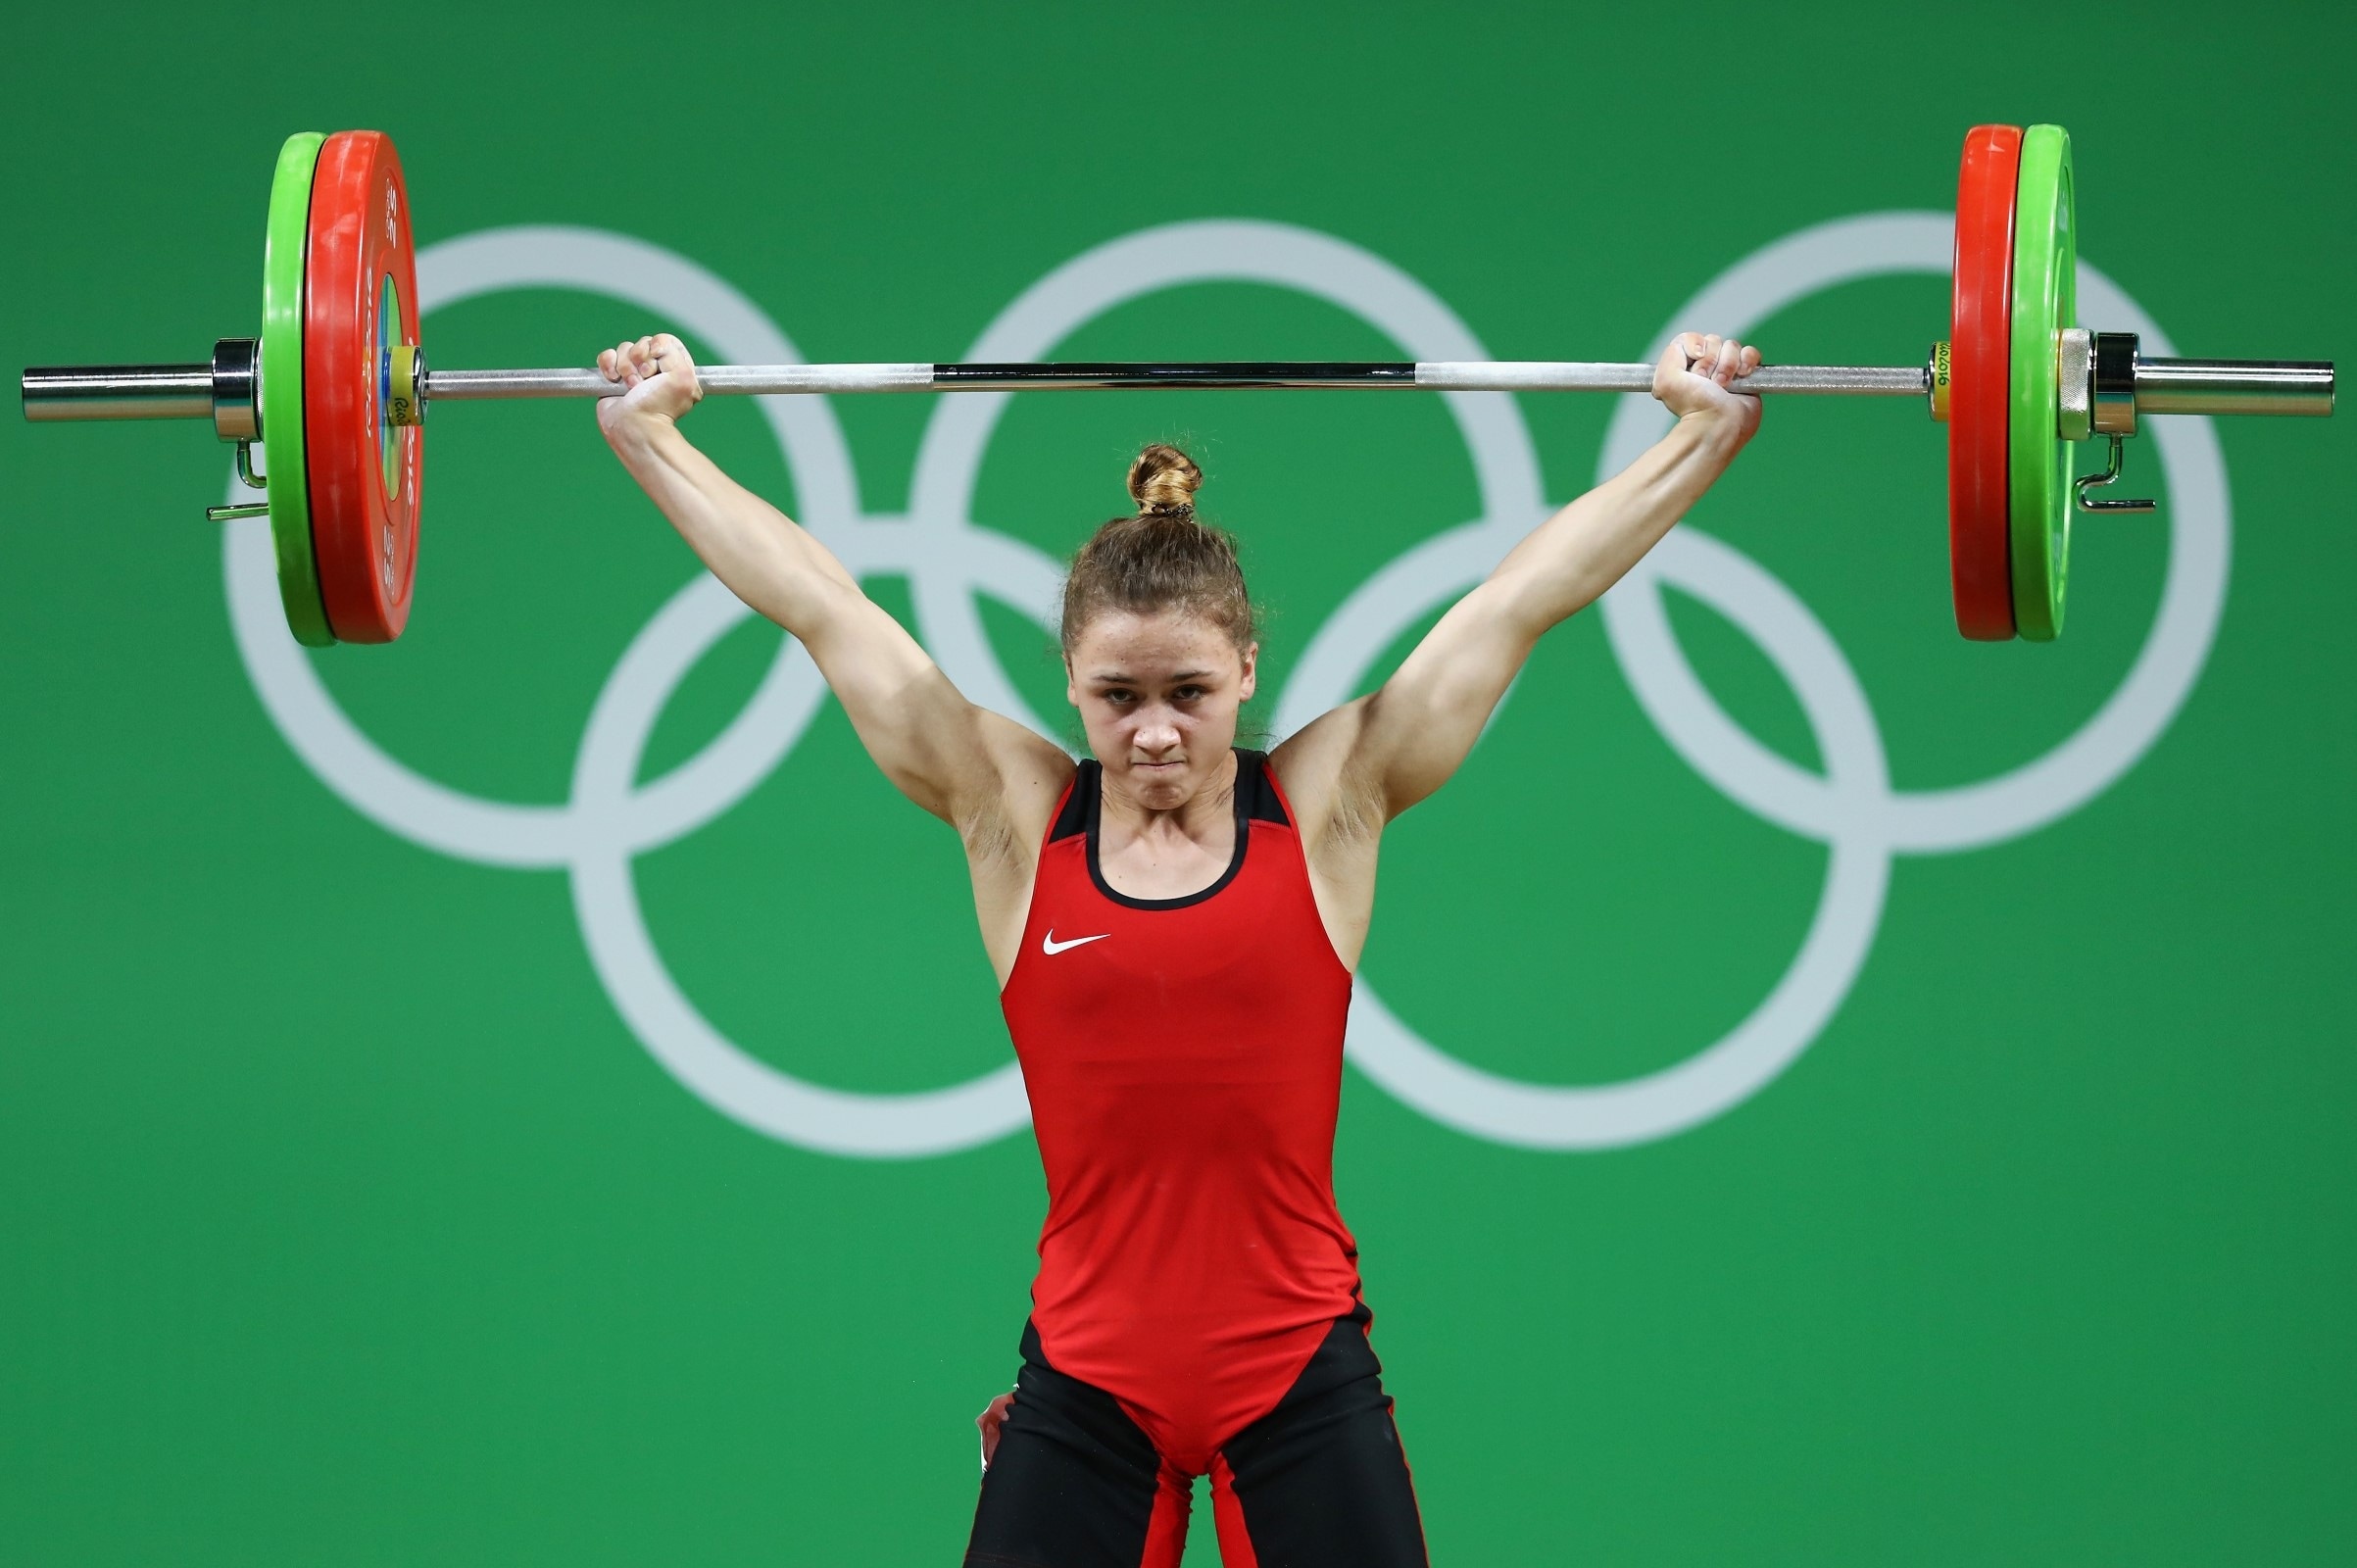 Weightlifting: 53 kg women's division, The barbell in the hands, Core strength. 2410x1600 HD Wallpaper.